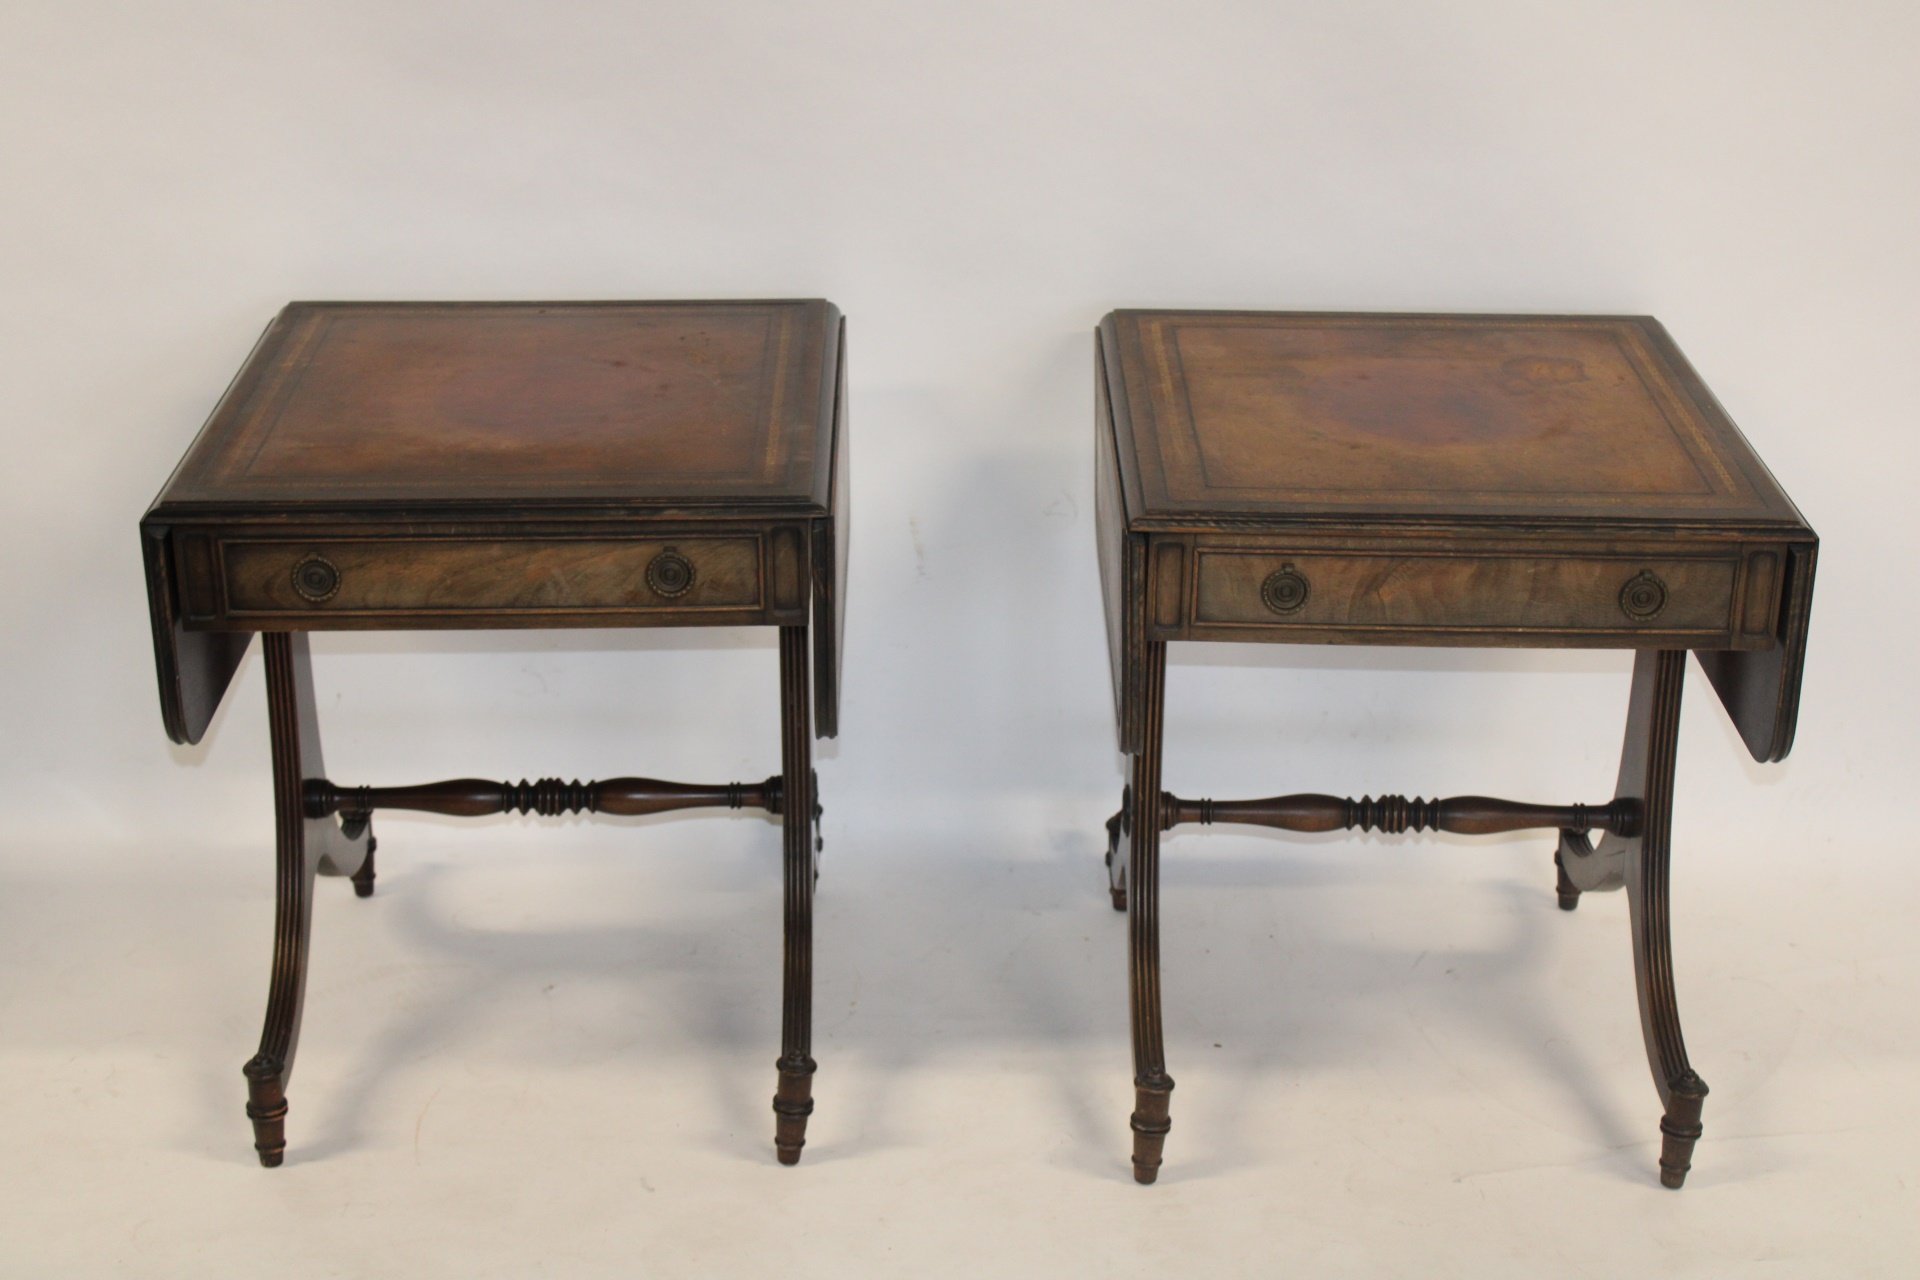 AN ANTIQUE PAIR OF MAHOGANY LEATHERTOP